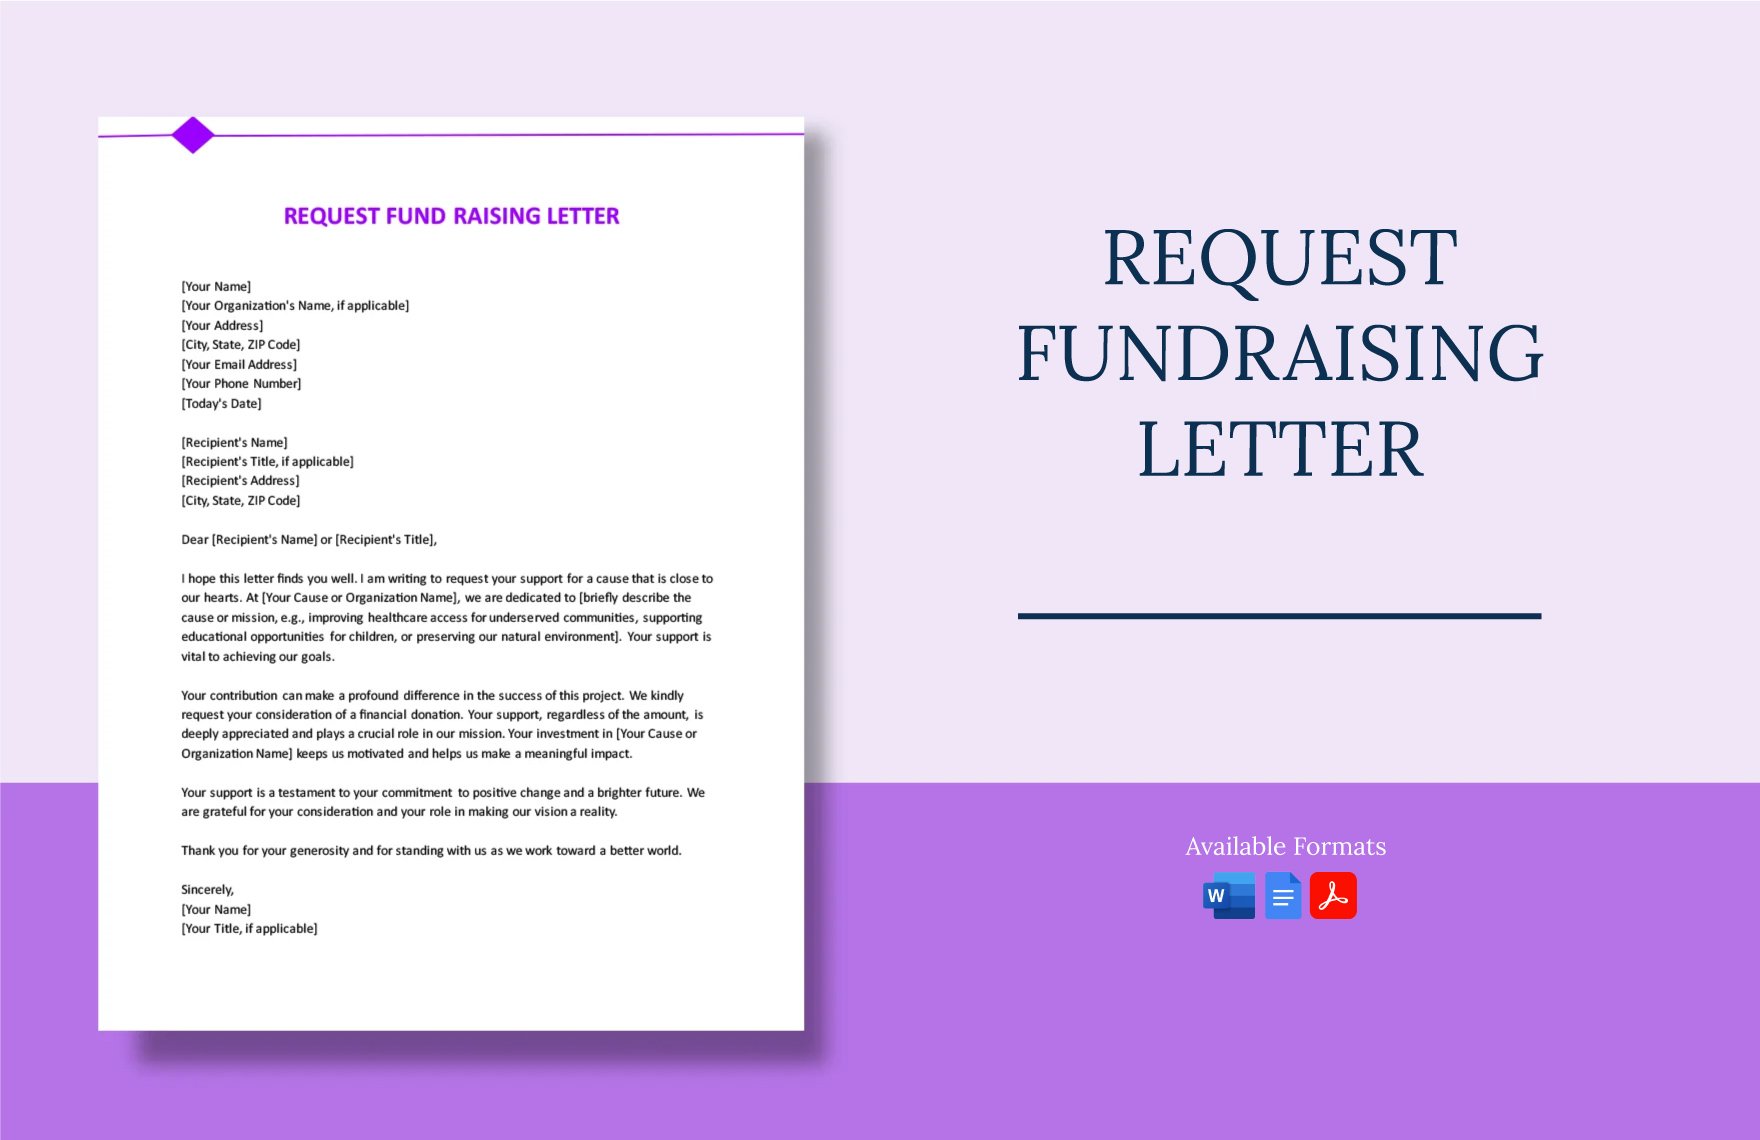 Request Fundraising Letter